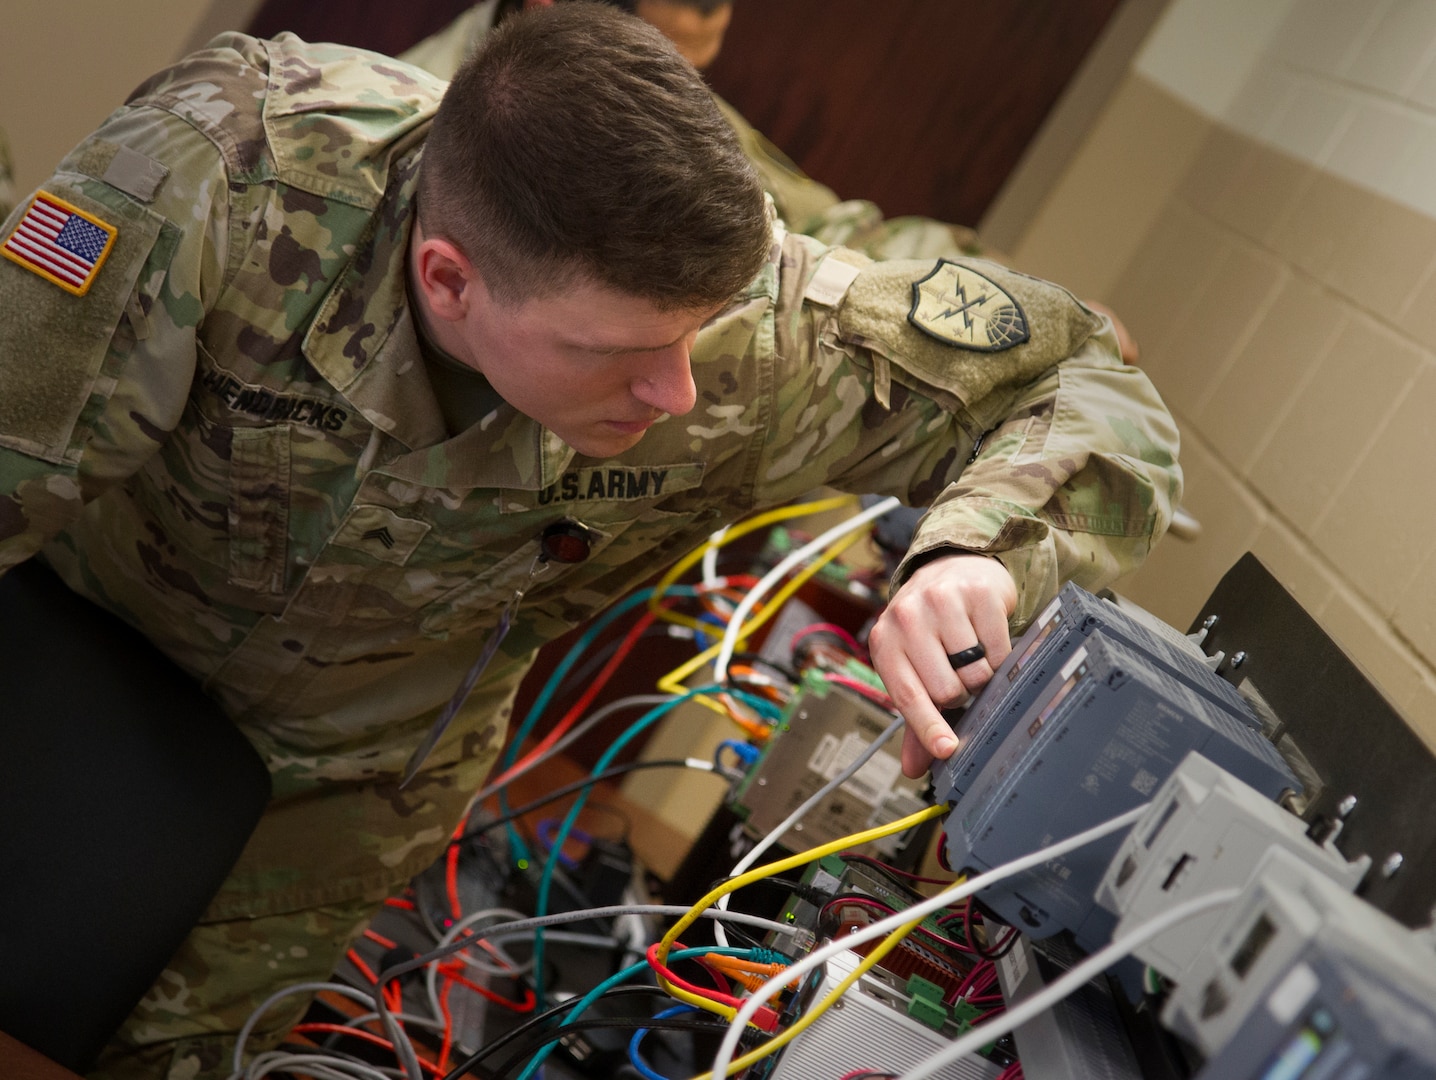 Staff Sgt. Matthew Hendricks of Maryland National Guard’s 169th Cyber Protection Team inspects a machine during a hands-on exercise while attending Cyber Shield 19 at Camp Atterbury, Ind., April 11, 2019. Military personnel work closely with interagency partners and the private sector to strengthen cybersecurity.